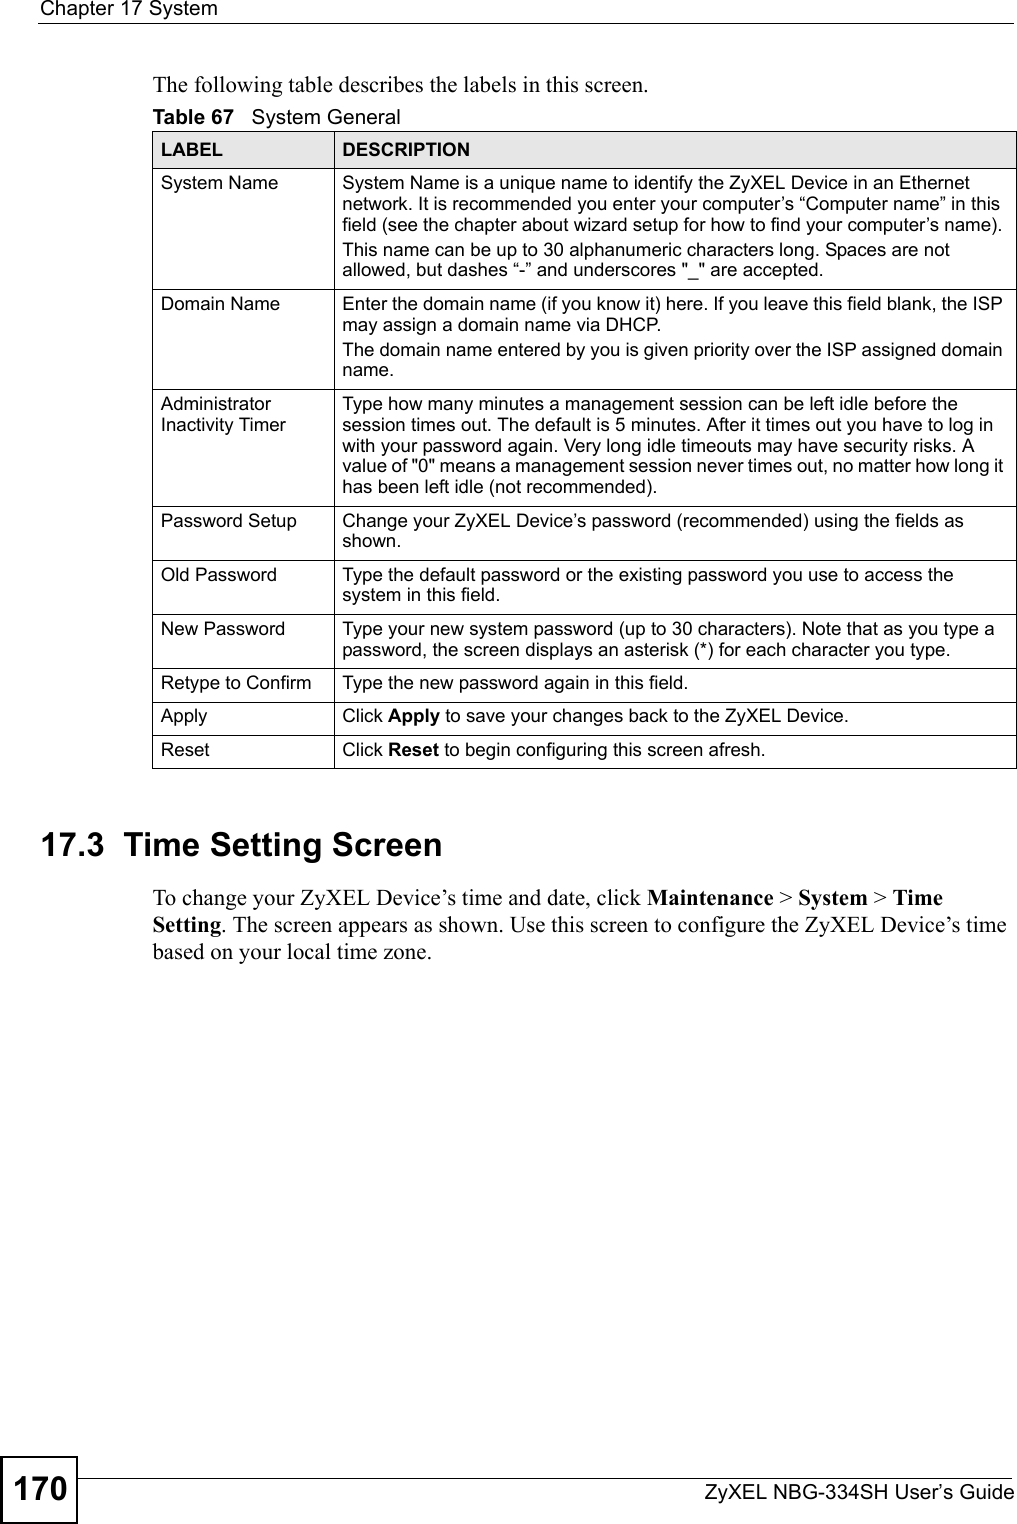 Chapter 17 SystemZyXEL NBG-334SH User’s Guide170The following table describes the labels in this screen.17.3  Time Setting ScreenTo change your ZyXEL Device’s time and date, click Maintenance &gt; System &gt; Time Setting. The screen appears as shown. Use this screen to configure the ZyXEL Device’s time based on your local time zone.Table 67   System GeneralLABEL DESCRIPTIONSystem Name System Name is a unique name to identify the ZyXEL Device in an Ethernet network. It is recommended you enter your computer’s “Computer name” in this field (see the chapter about wizard setup for how to find your computer’s name). This name can be up to 30 alphanumeric characters long. Spaces are not allowed, but dashes “-” and underscores &quot;_&quot; are accepted.Domain Name Enter the domain name (if you know it) here. If you leave this field blank, the ISP may assign a domain name via DHCP. The domain name entered by you is given priority over the ISP assigned domain name.Administrator Inactivity TimerType how many minutes a management session can be left idle before the session times out. The default is 5 minutes. After it times out you have to log in with your password again. Very long idle timeouts may have security risks. A value of &quot;0&quot; means a management session never times out, no matter how long it has been left idle (not recommended).Password Setup Change your ZyXEL Device’s password (recommended) using the fields as shown.Old Password Type the default password or the existing password you use to access the system in this field.New Password Type your new system password (up to 30 characters). Note that as you type a password, the screen displays an asterisk (*) for each character you type.Retype to Confirm Type the new password again in this field.Apply Click Apply to save your changes back to the ZyXEL Device.Reset Click Reset to begin configuring this screen afresh.